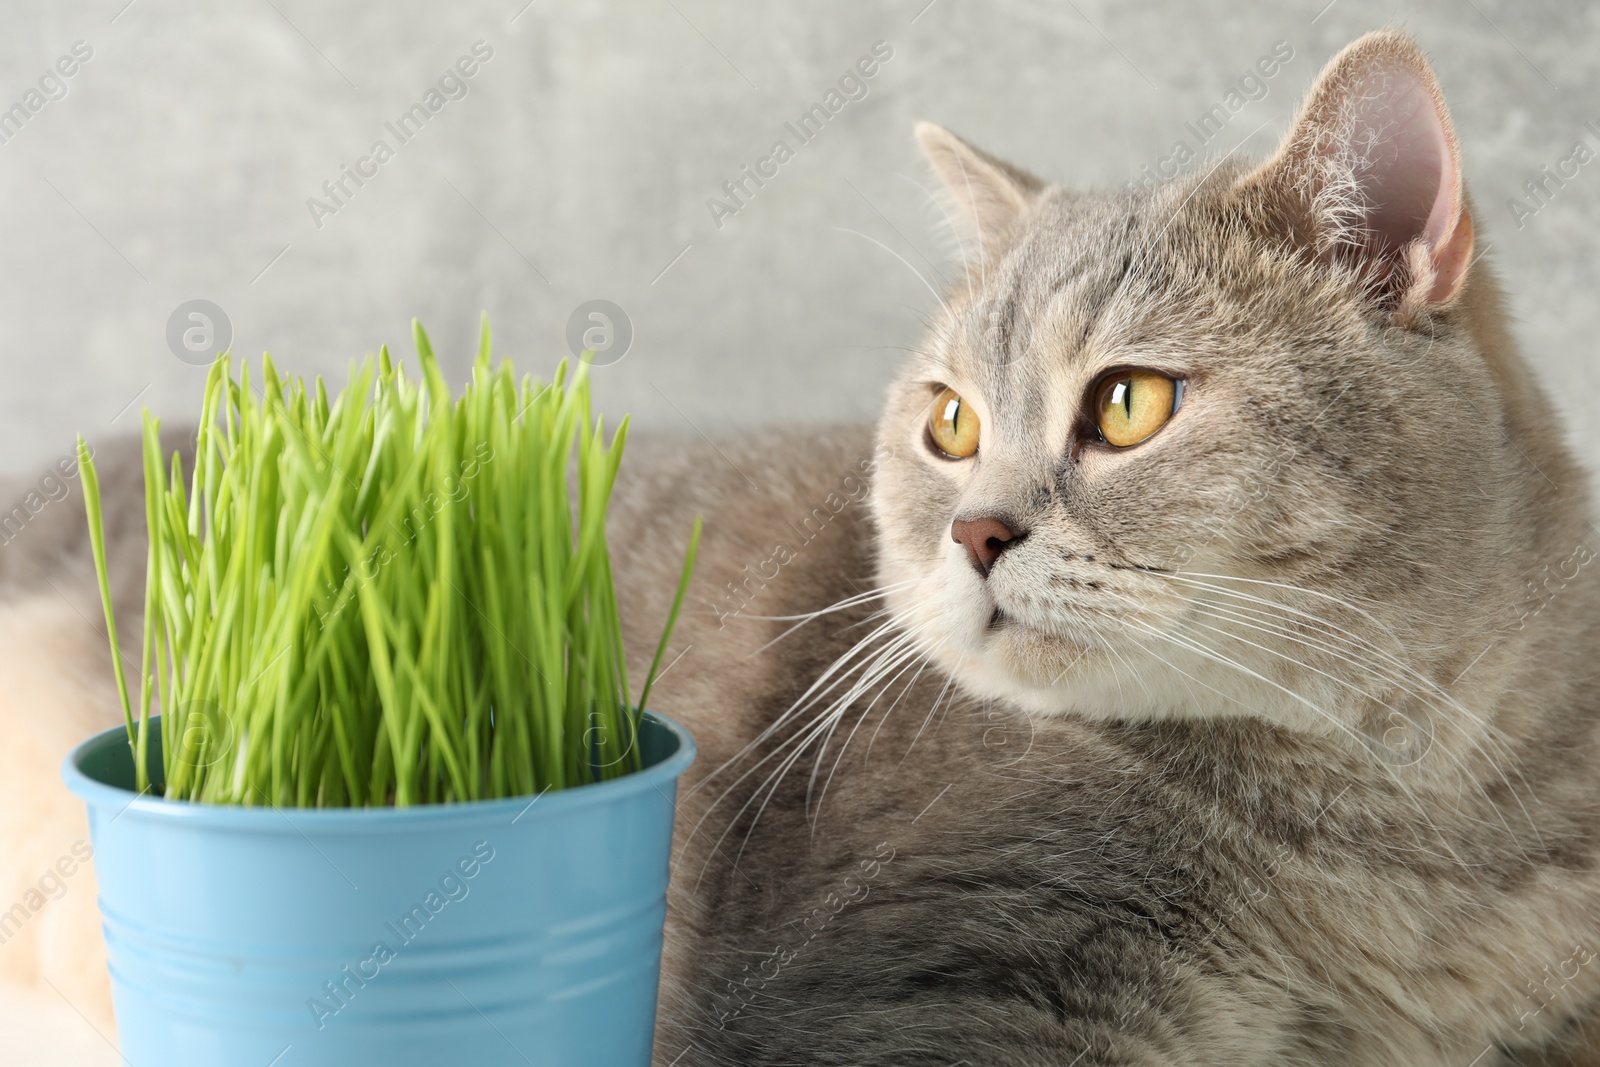 Photo of Cute cat and fresh green grass against grey wall